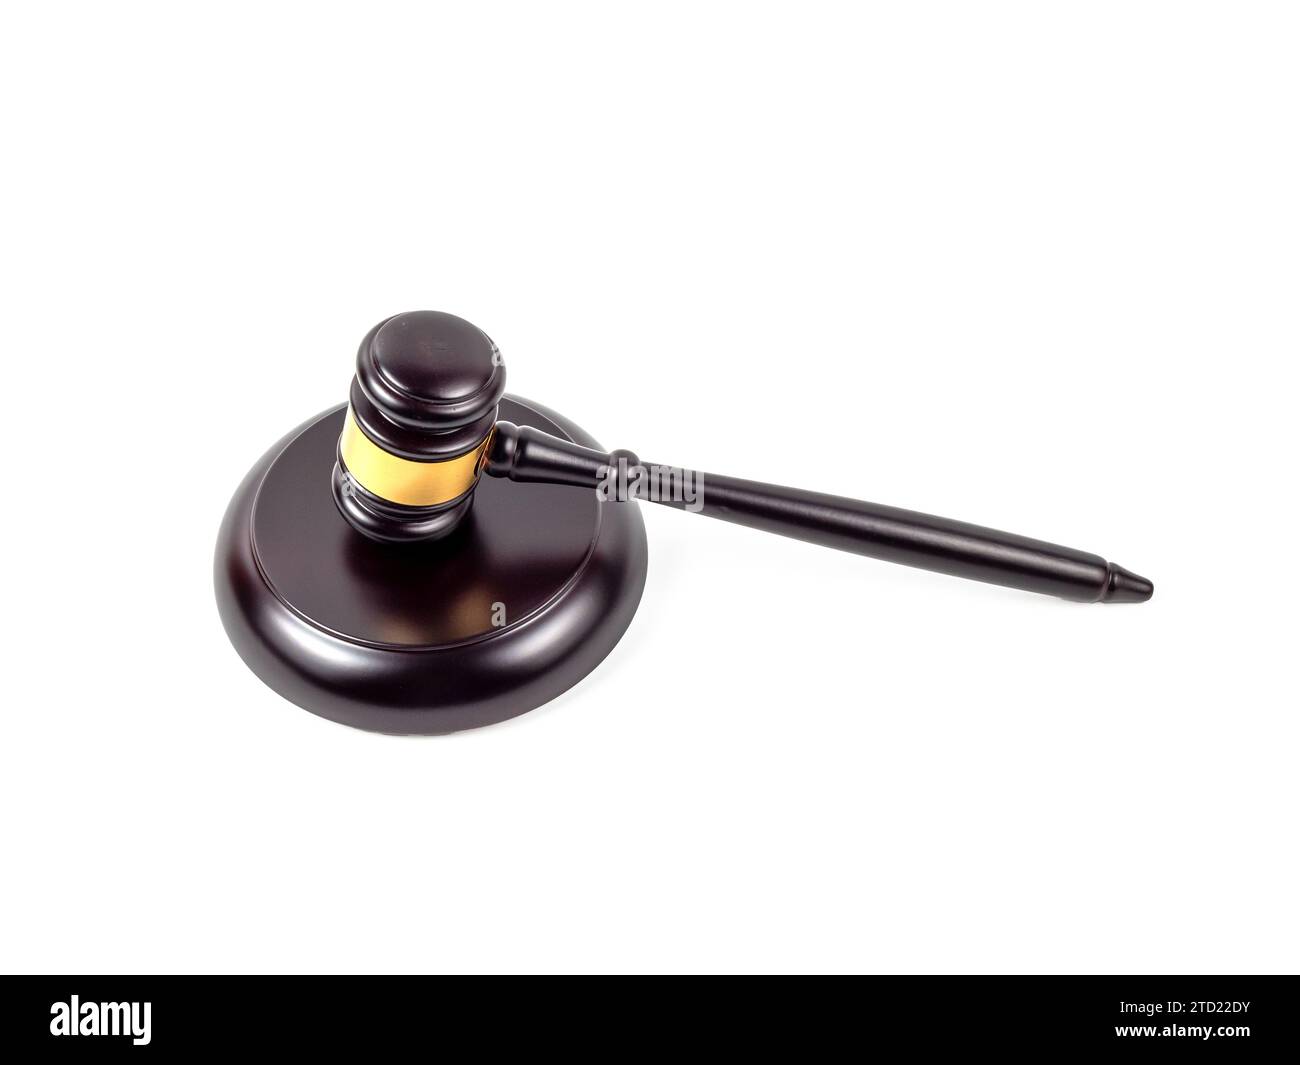 Judge's gavel for making a decision isolated on a white background. Auction hammer with wooden stand. The concept of law and justice. Stock Photo